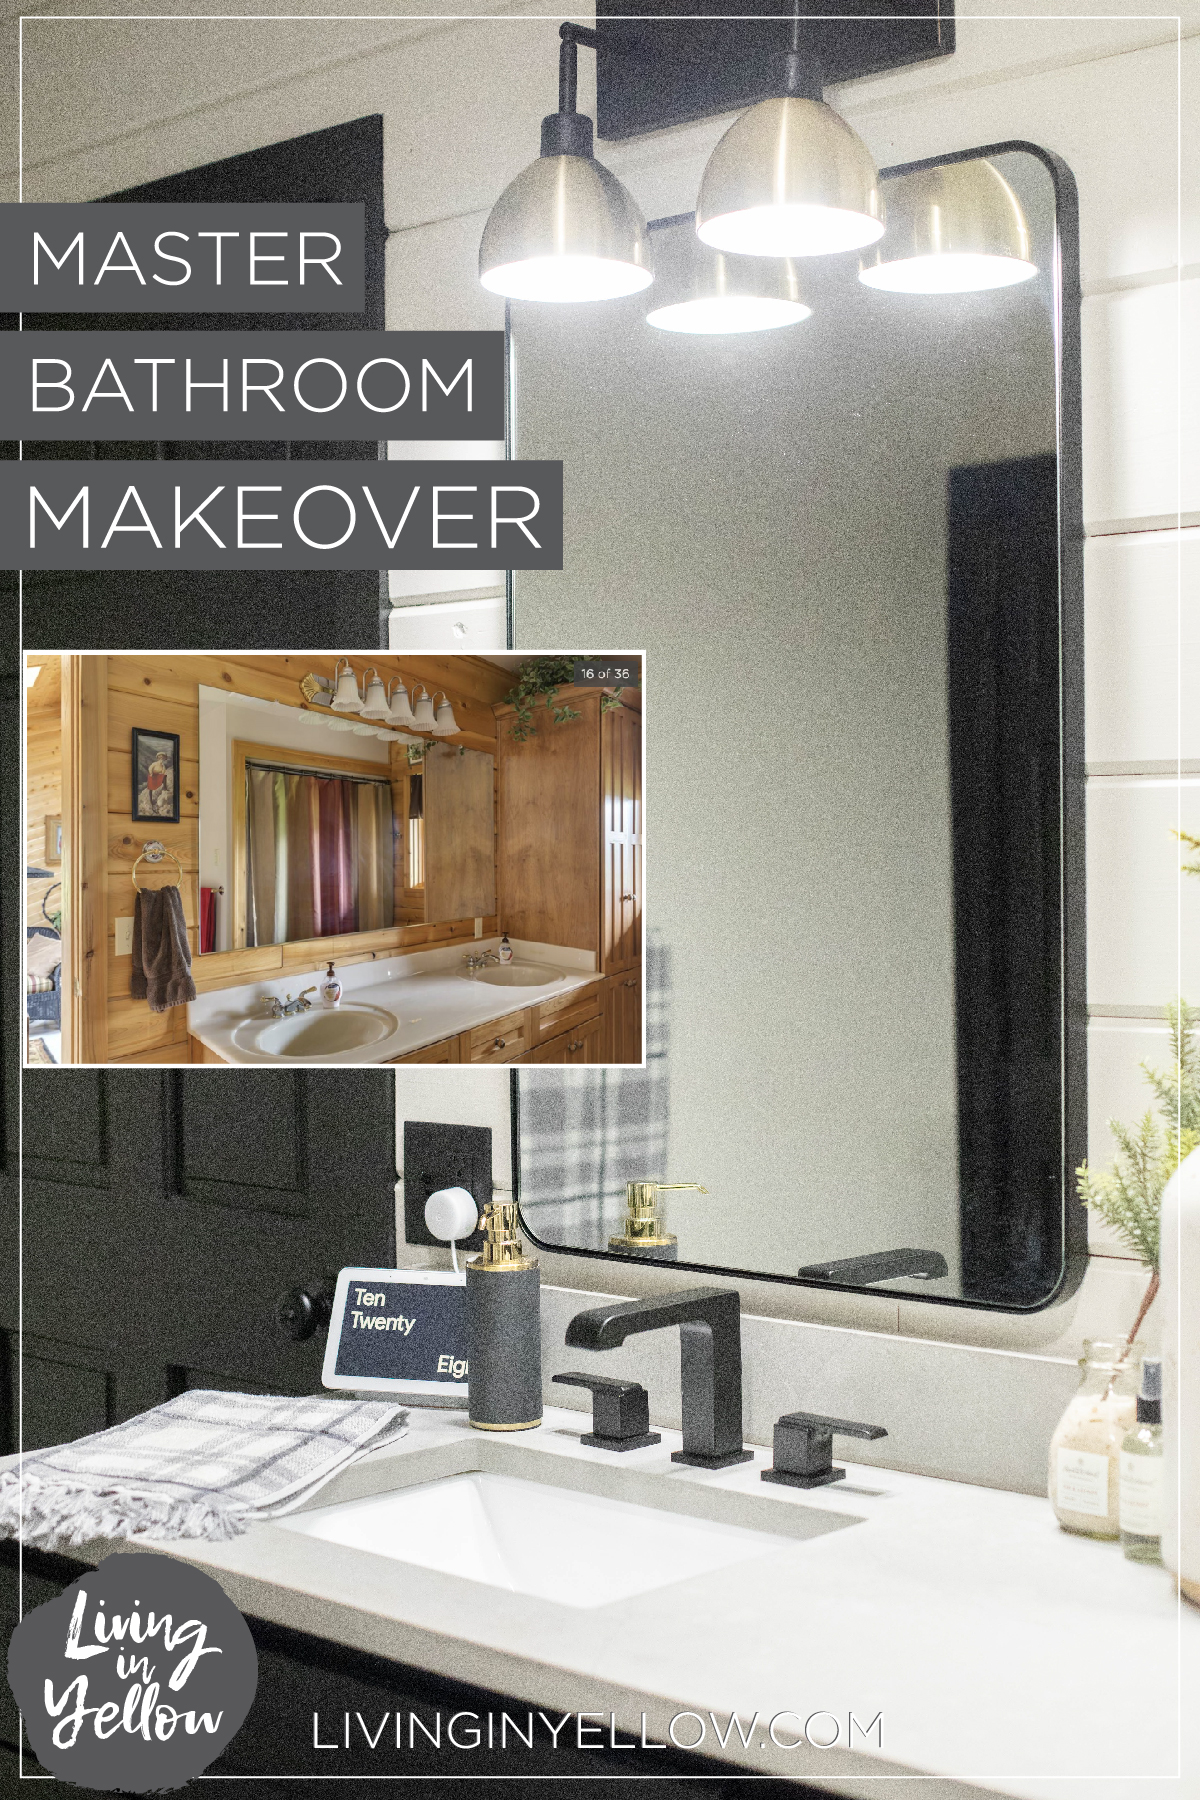 Master Bathroom Makeover / Before & After Reveal - Living in Yellow